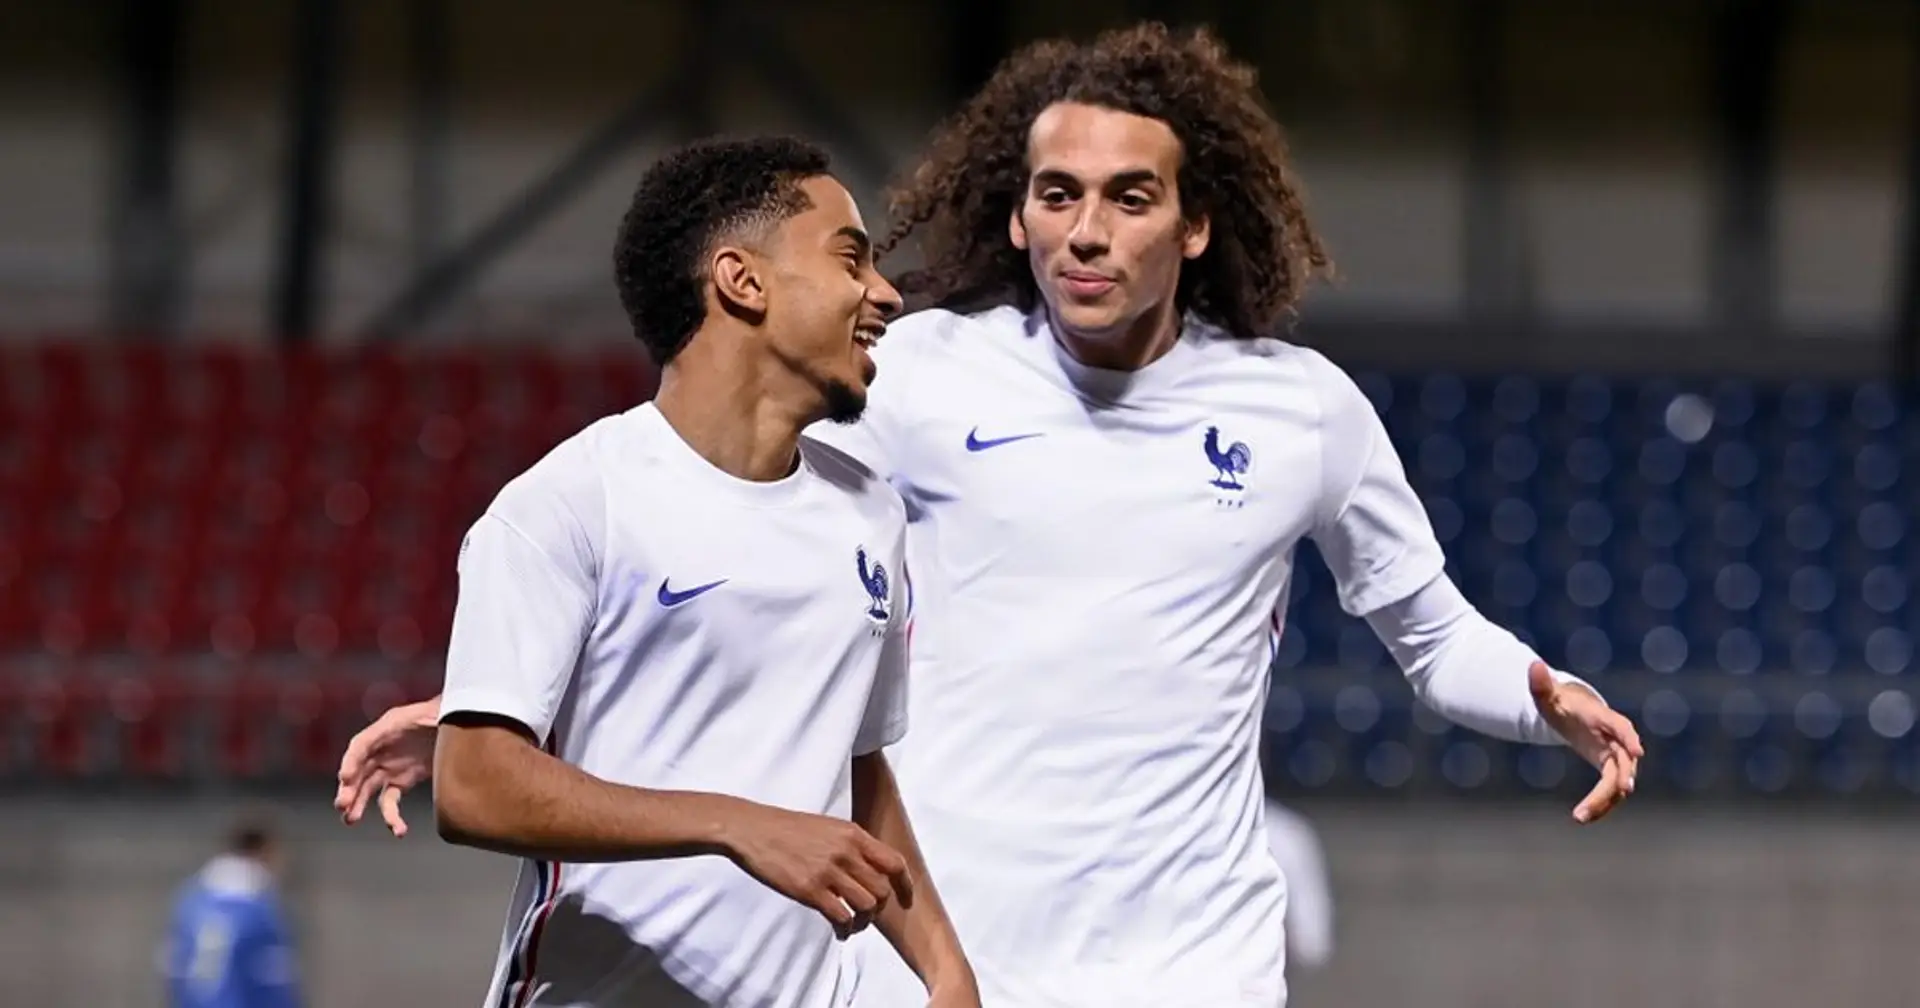 'There's something really wonderful ahead for this squad': Guendouzi aims for Euro success with France U21s team